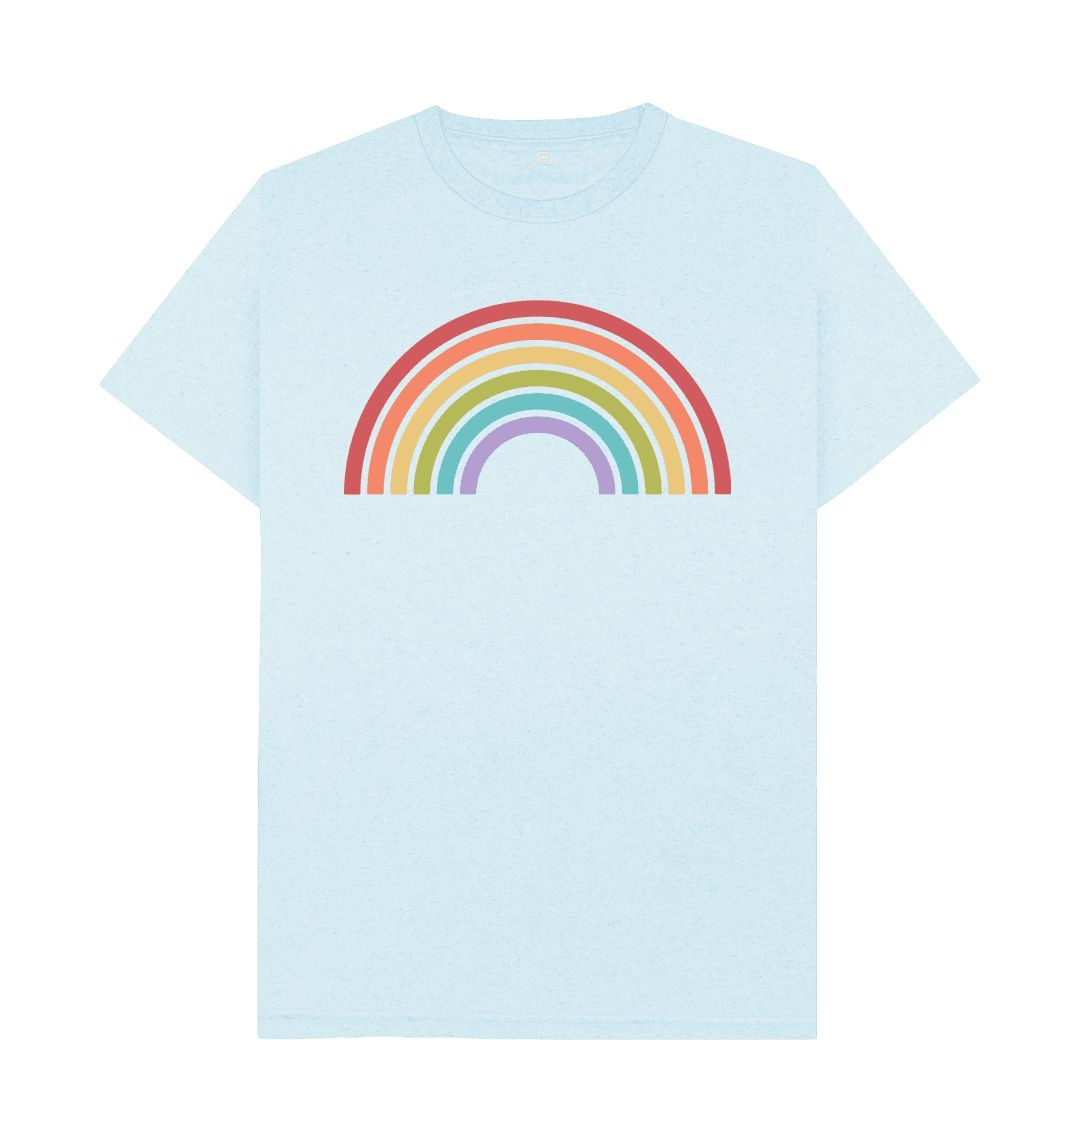 Light Blue Recycled Rainbow | Organic, Recycled  T-Shirt | Gender Neutral